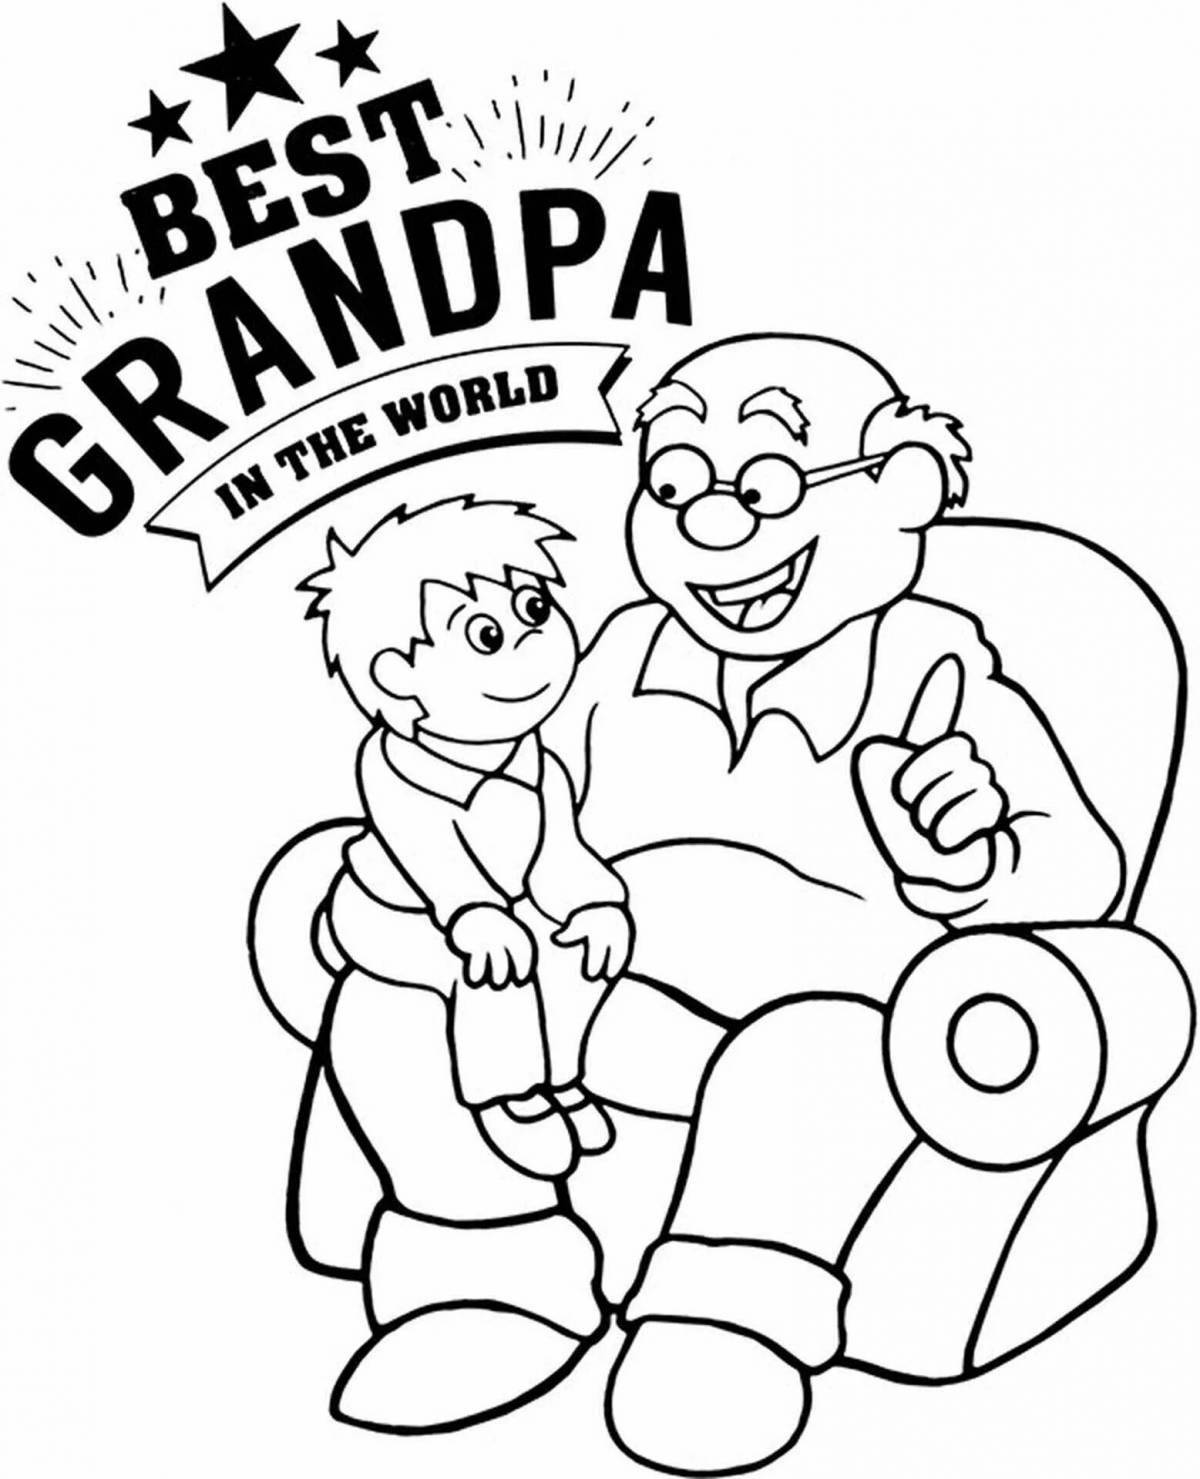 Fancy greeting card for grandpa